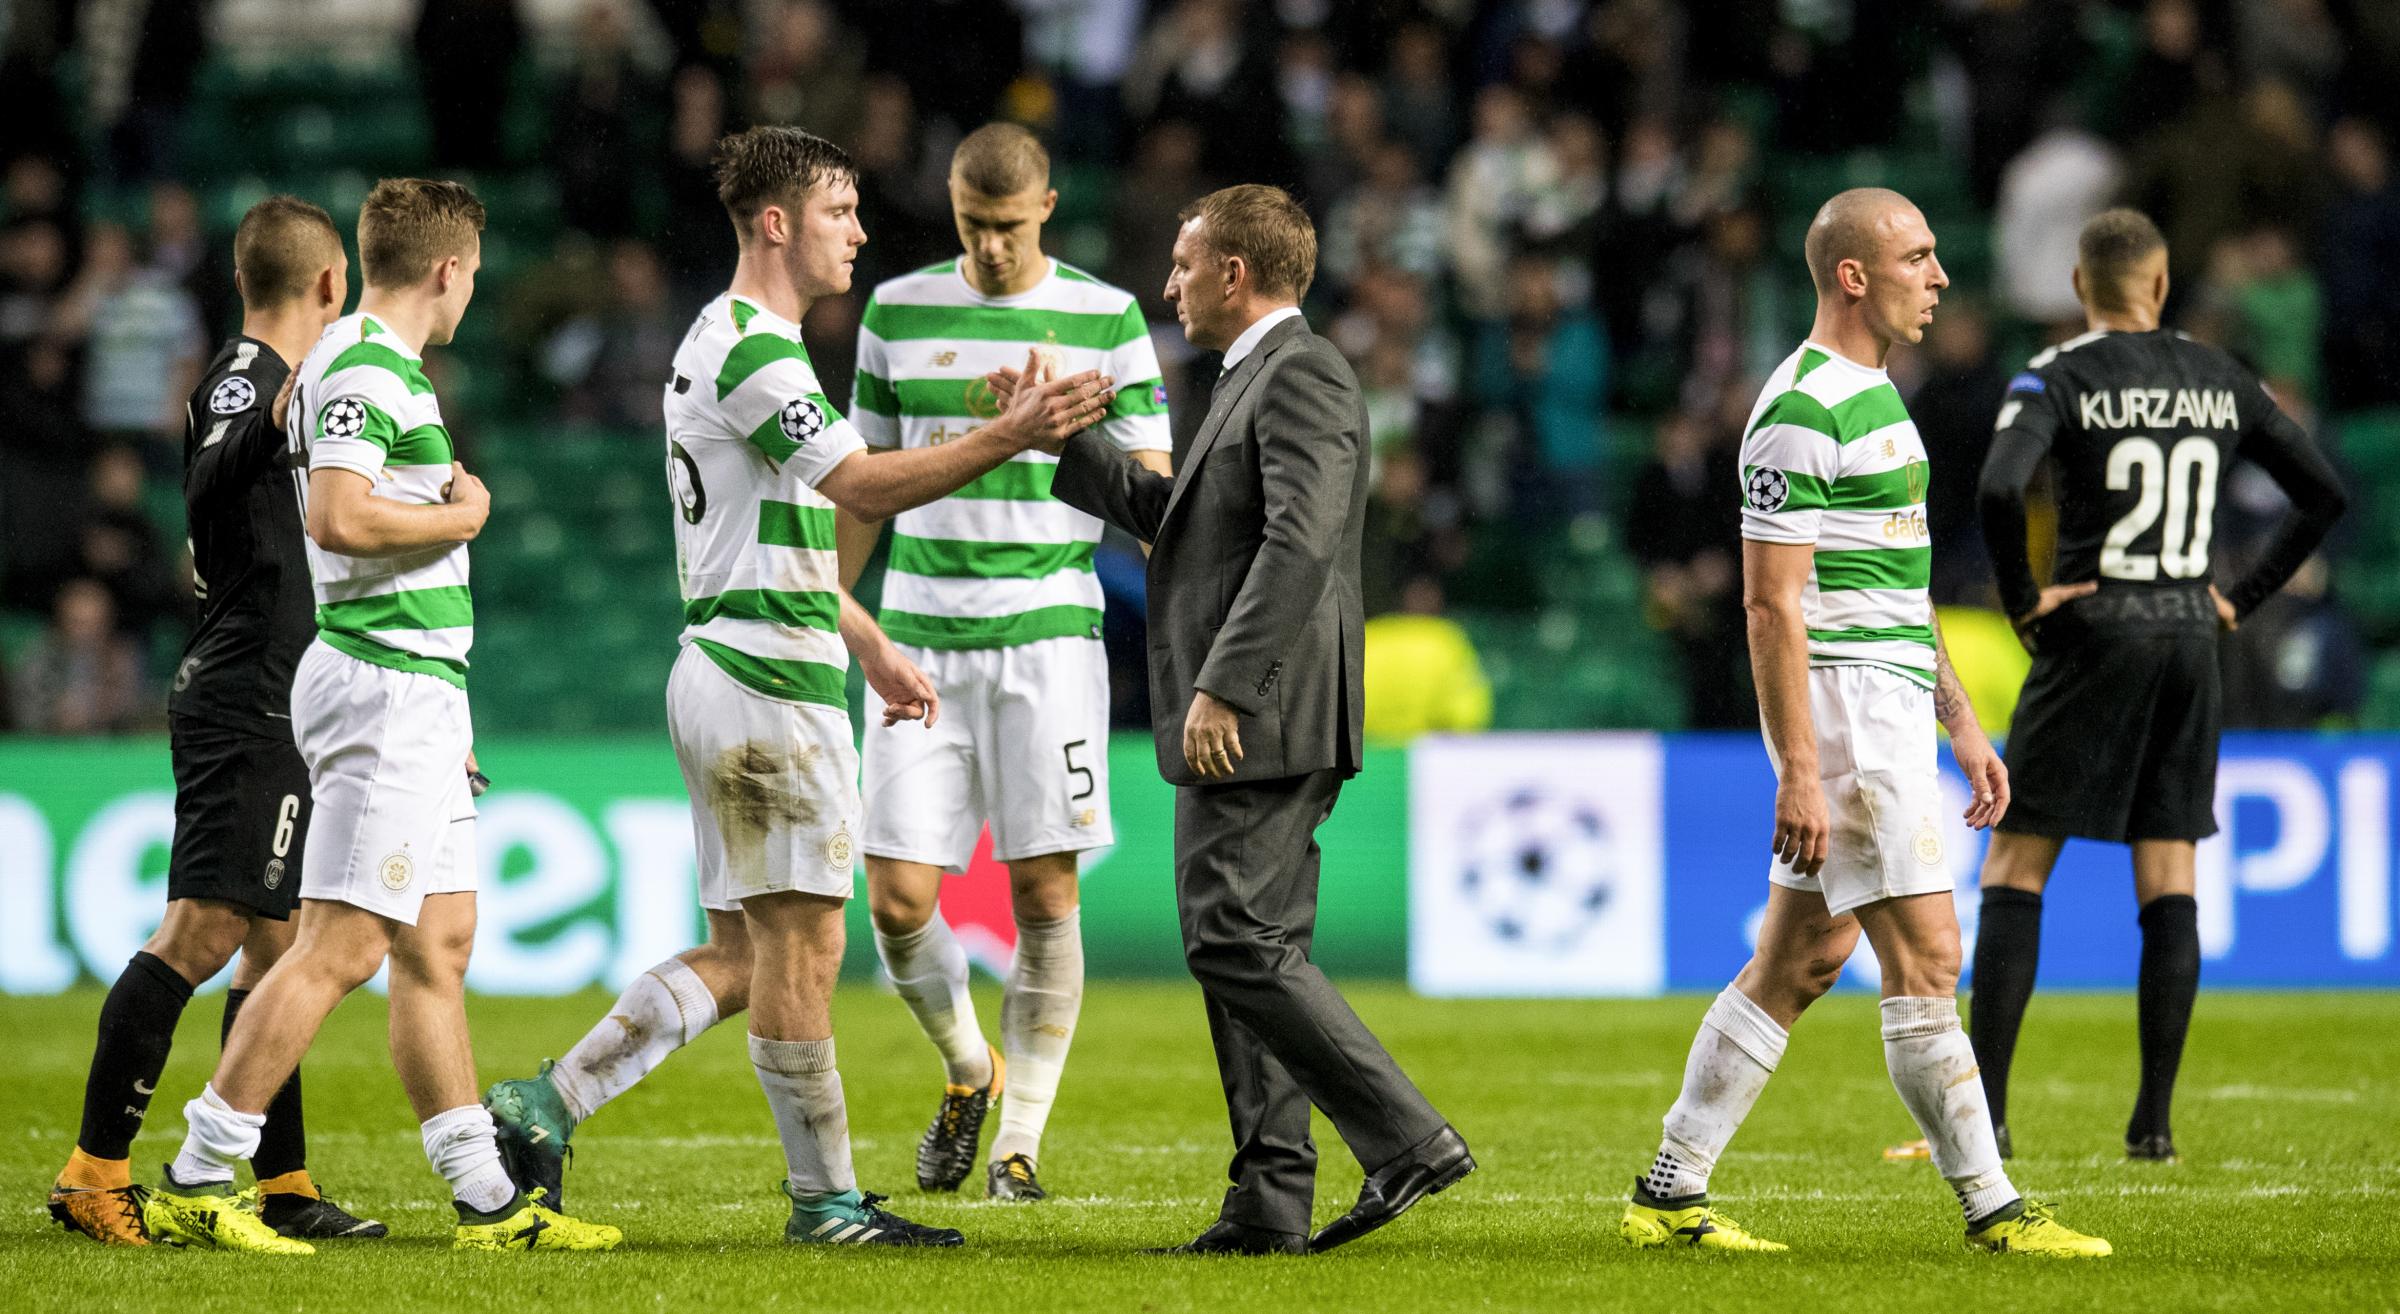 12/09/17 UEFA CHAMPIONS LEAGUE GROUP STAGE CELTIC v PSG CELTIC PARK - GLASGOW Celtic manager Brendan Rodgers (centre) with Anthony Ralston at full-time